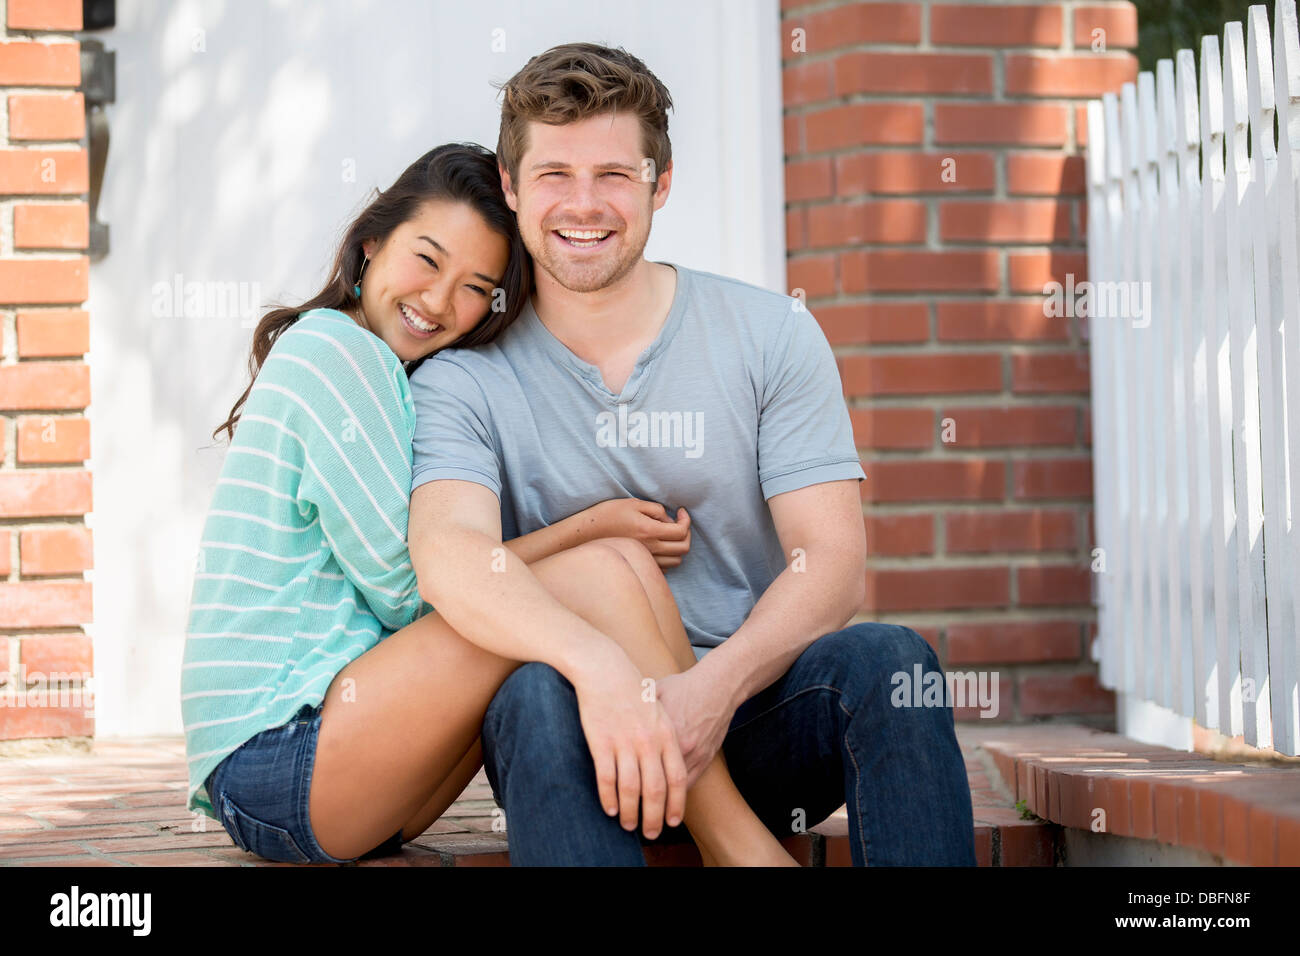 Couple smiling together outdoors Stock Photo